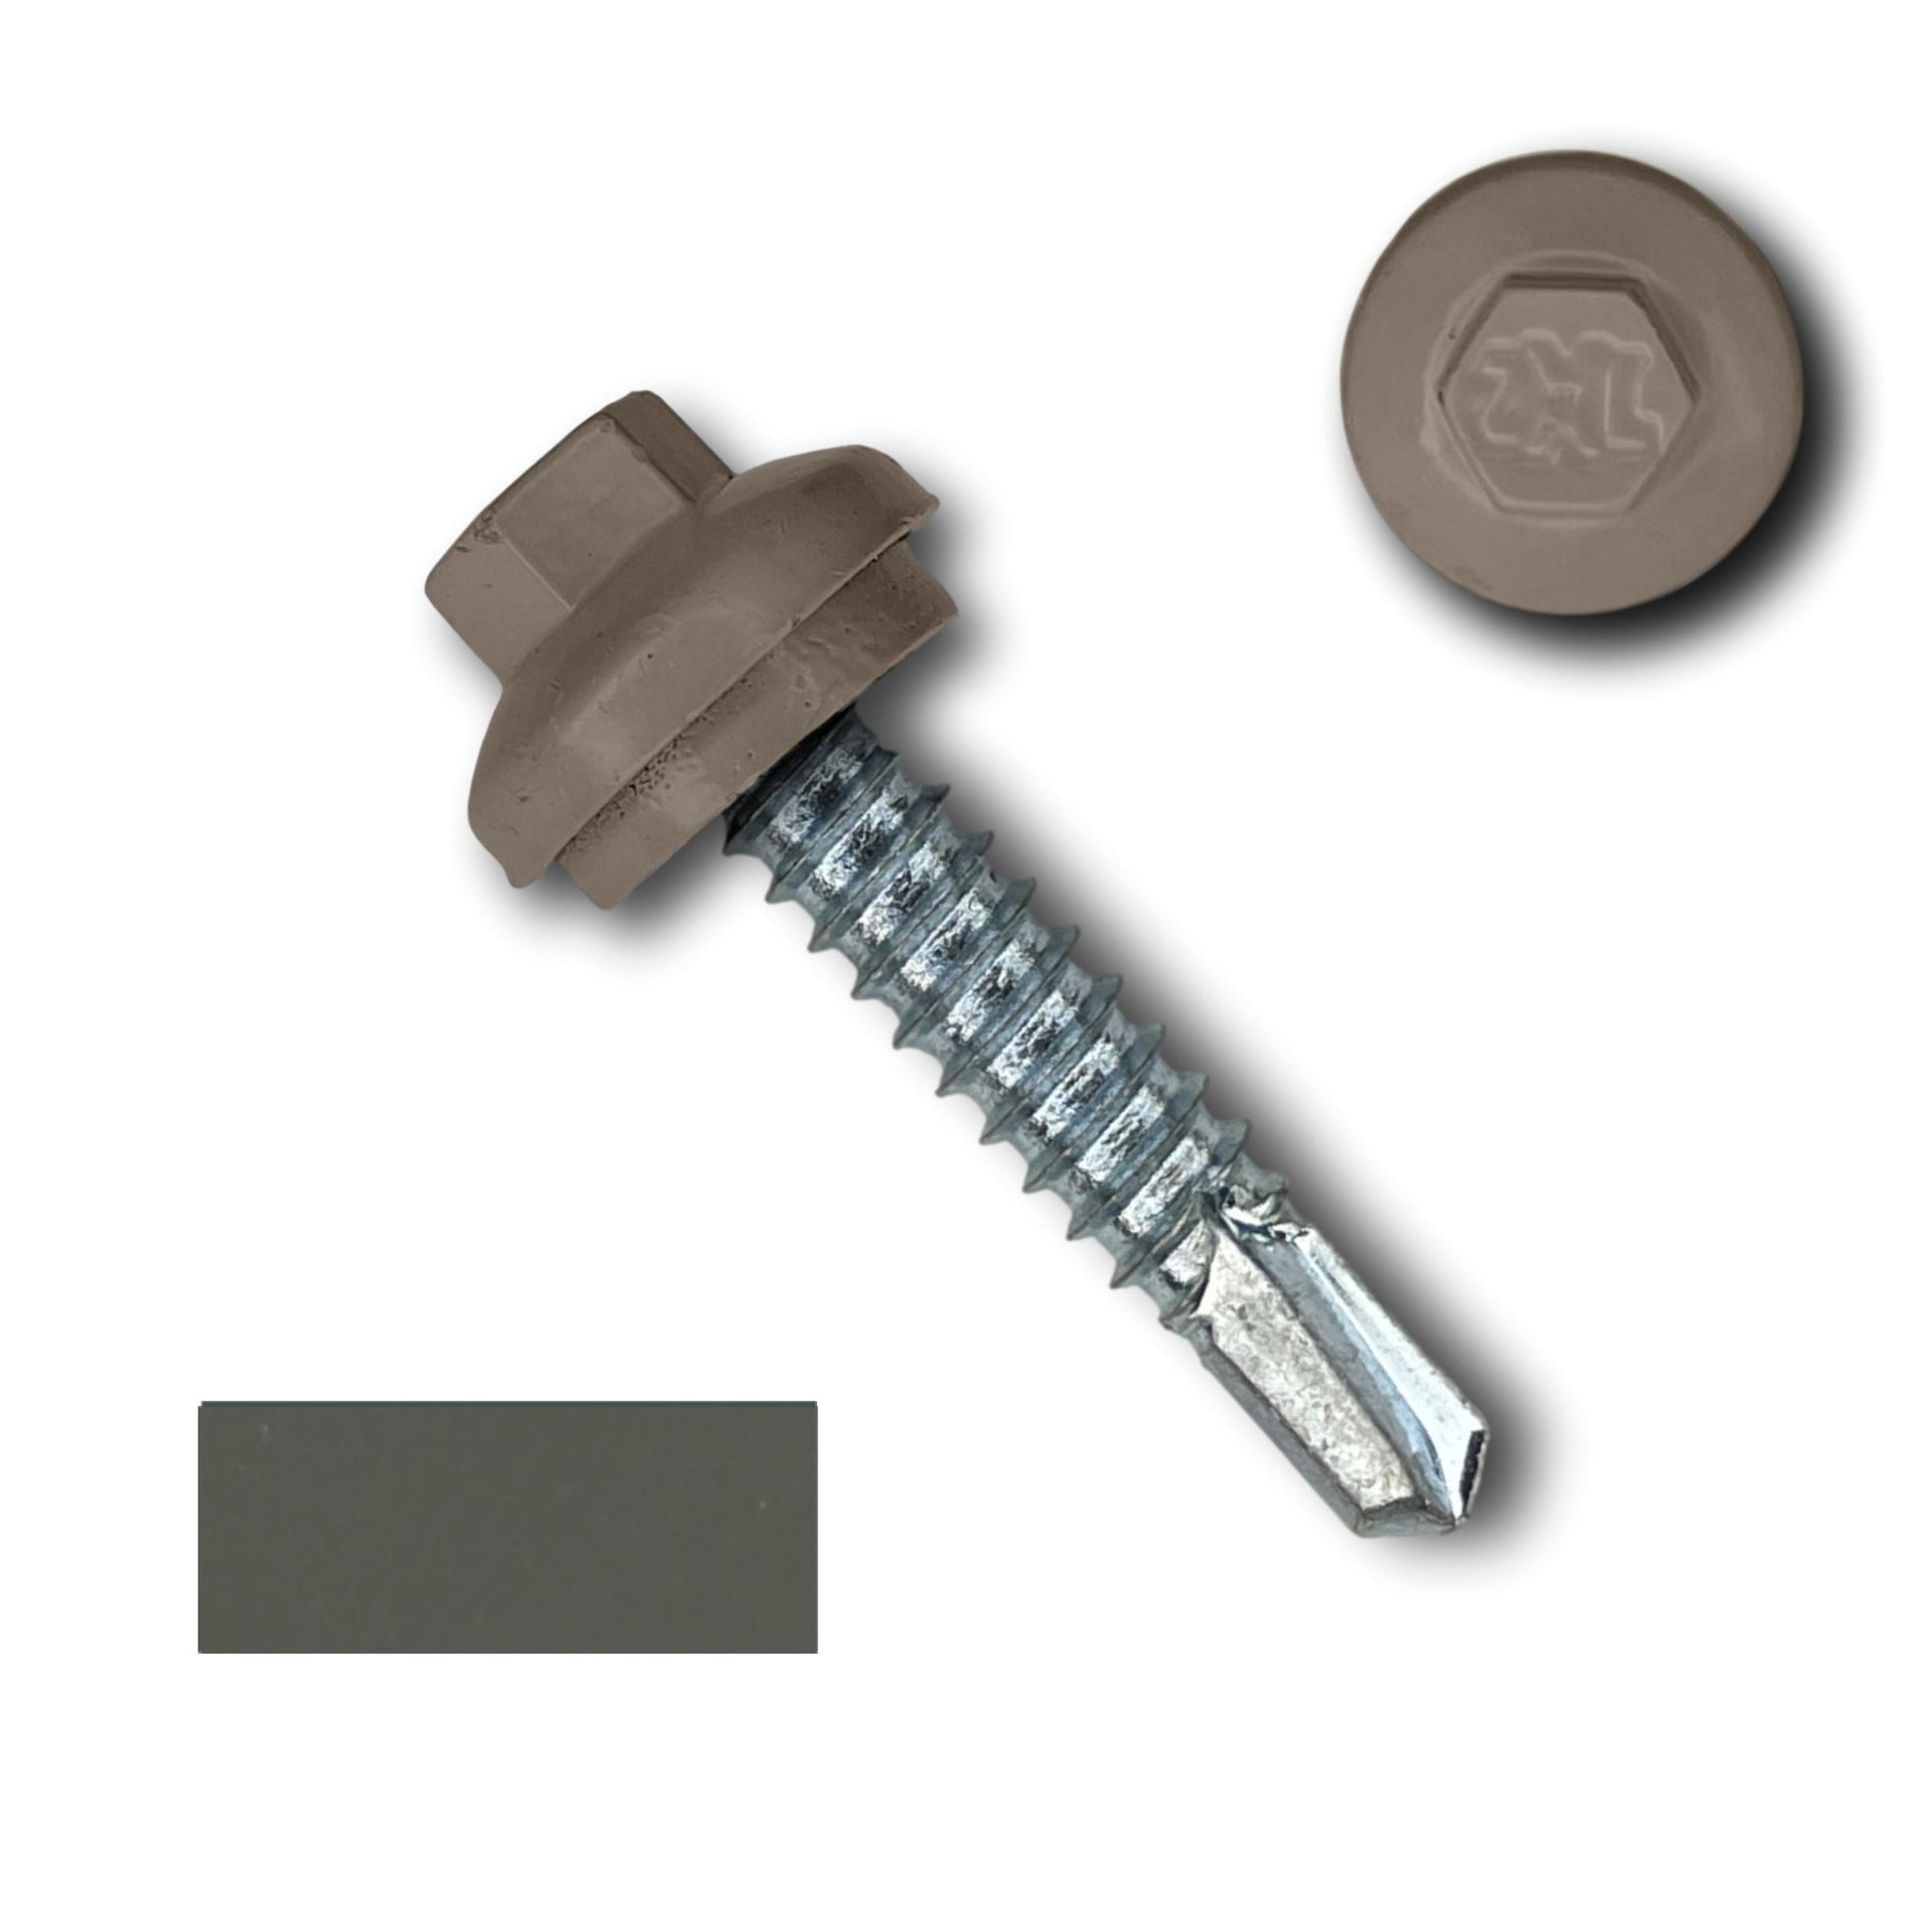 A #14 x 1.25" ZXL Dome Cap Metal Building Screw (Metal-to-Metal), Self-Drilling from Perma Cover with a brown hex washer head is displayed against a white background. Next to the self-drilling screw, there is a close-up of the brown hex washer head and a small rectangular sample of the same brown color.